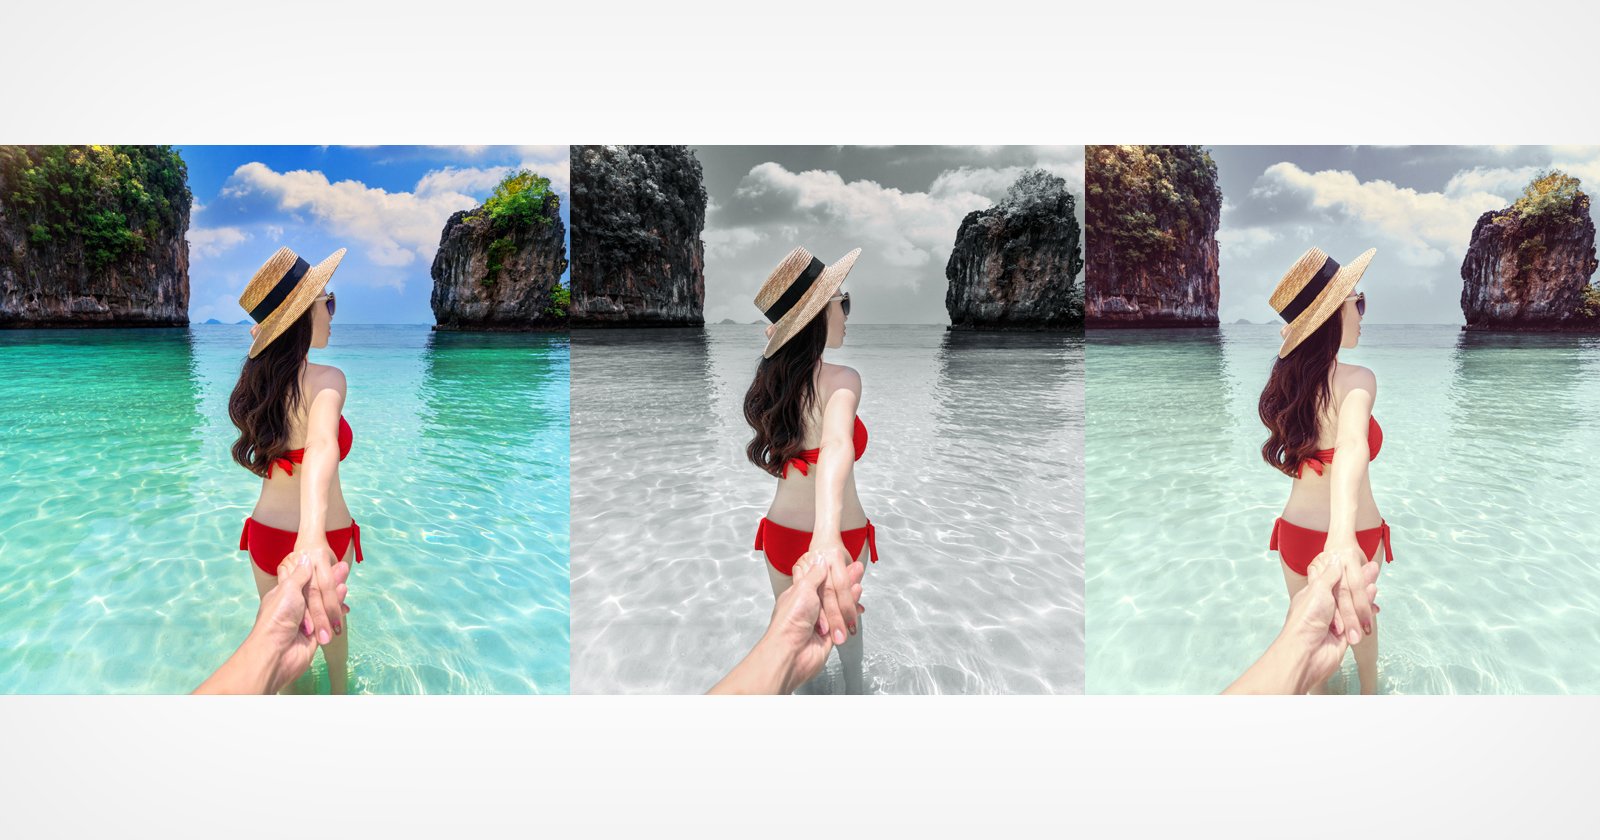 Retouch4Me’s New Color Match Photoshop Plugin Makes Color Matching Effortless